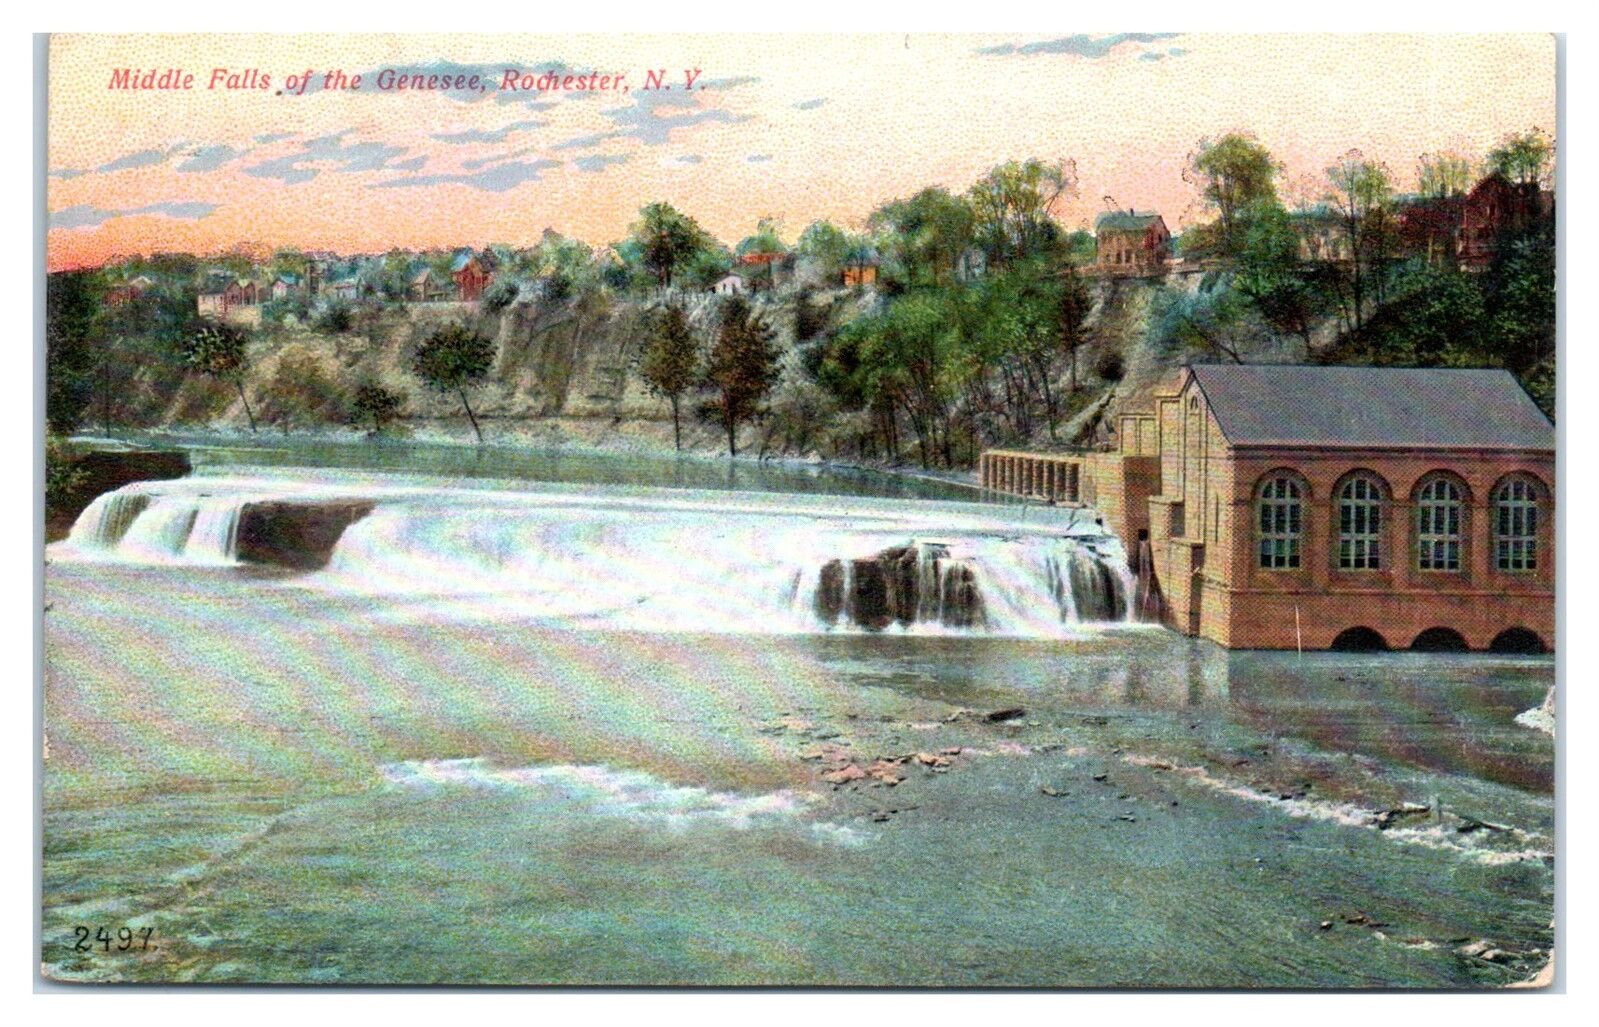 1909 Middle Falls of the Genesee River, Rochester, NY Postcard